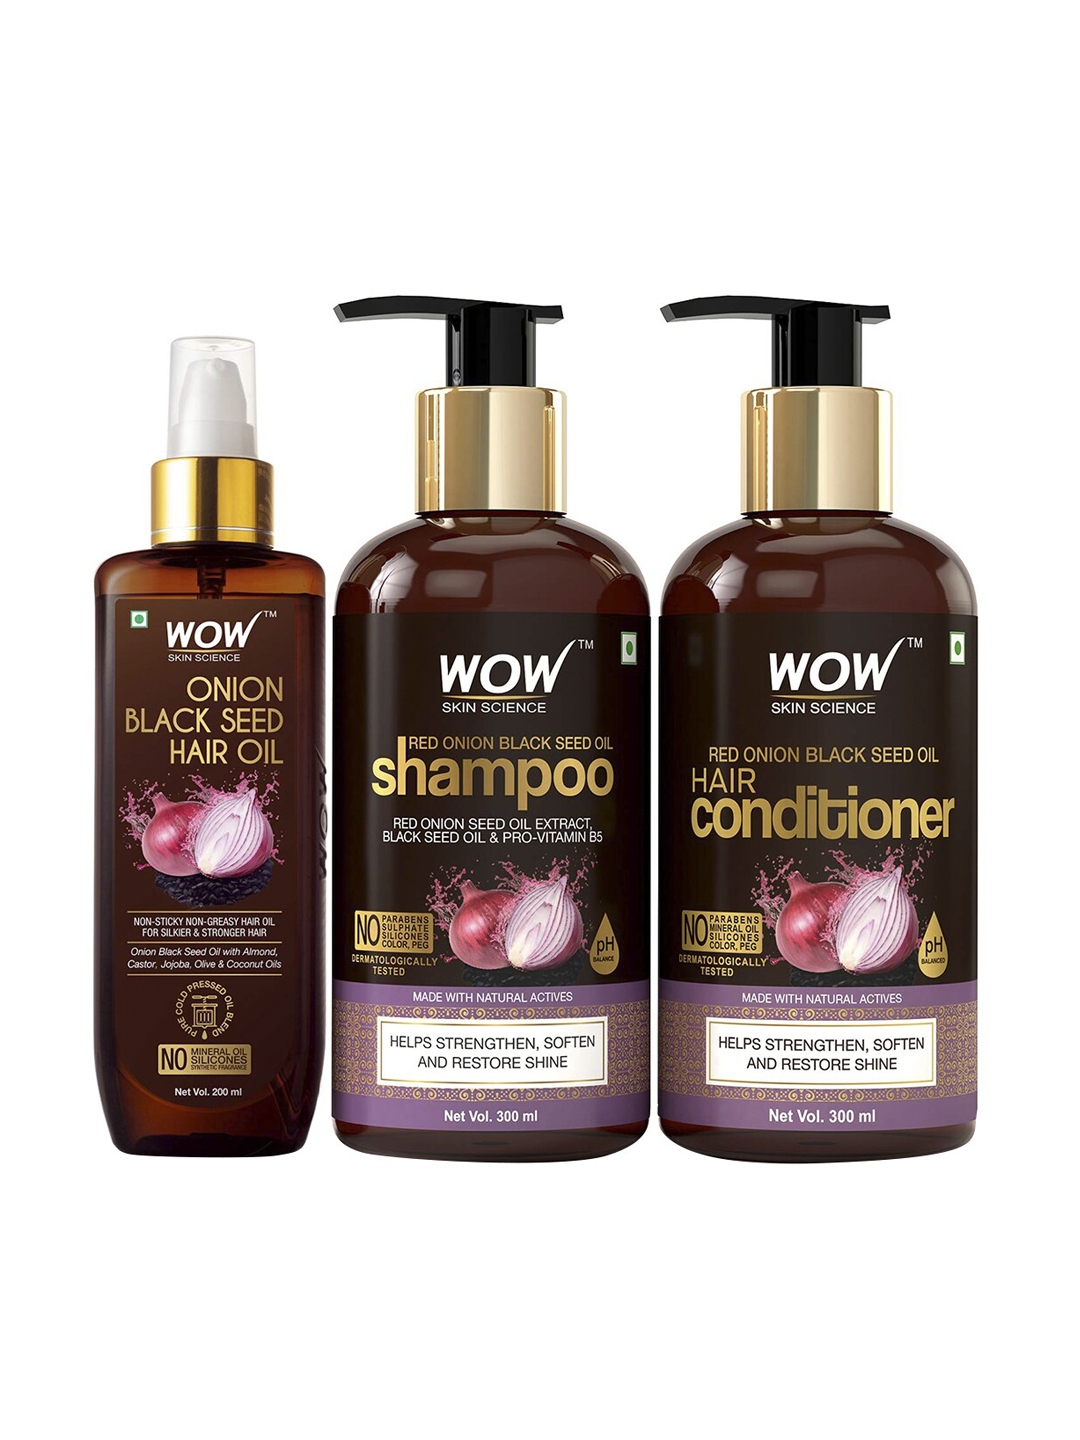 WOW Skin Science Onion Black Seed Hair Oil For Silkier  Stronger Hair Buy  WOW Skin Science Onion Black Seed Hair Oil For Silkier  Stronger Hair  Online at Best Price in